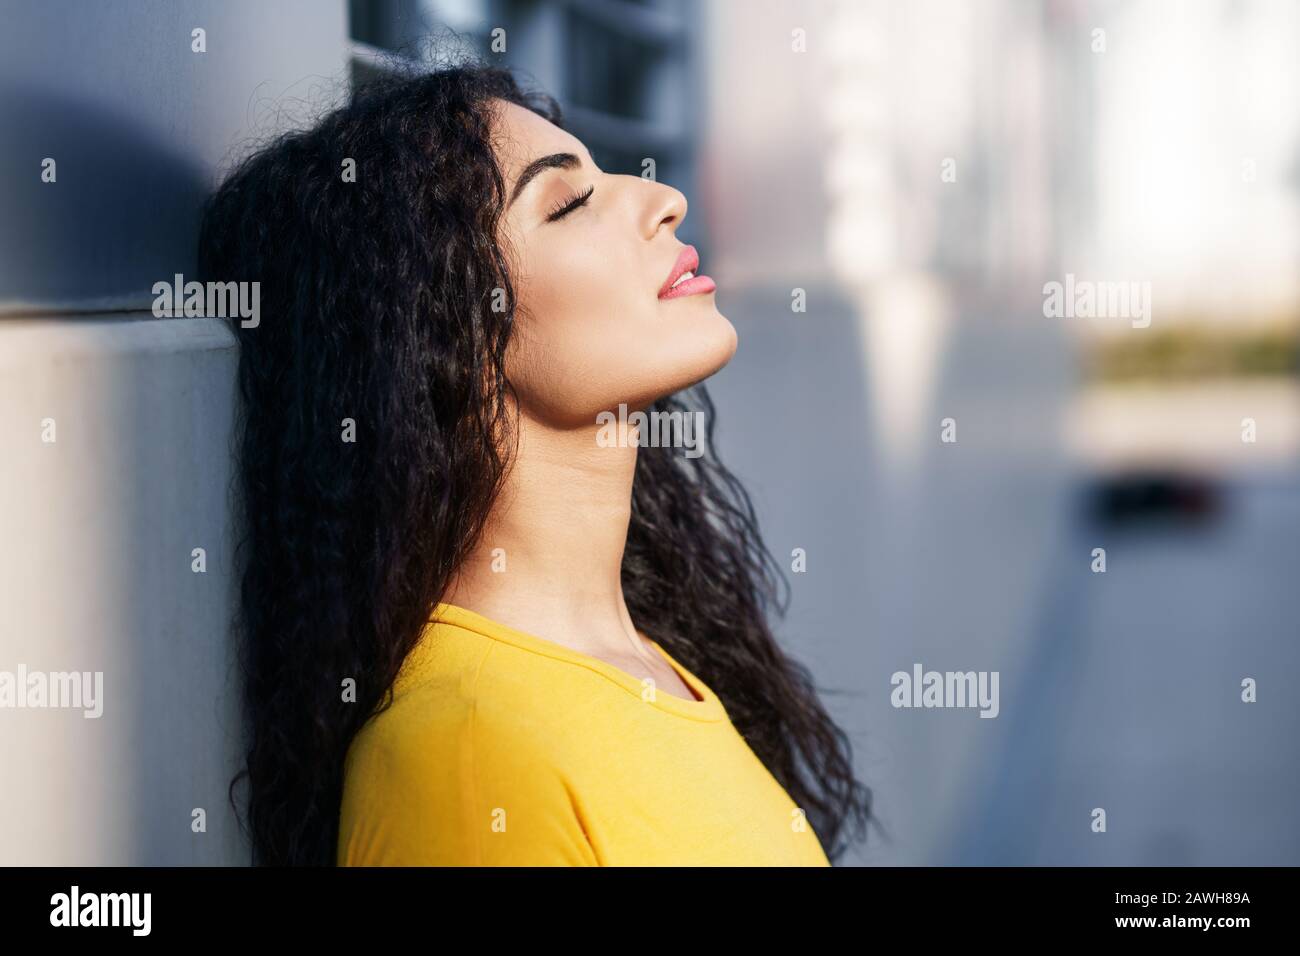 Arab woman with eyes closed in urban background Stock Photo